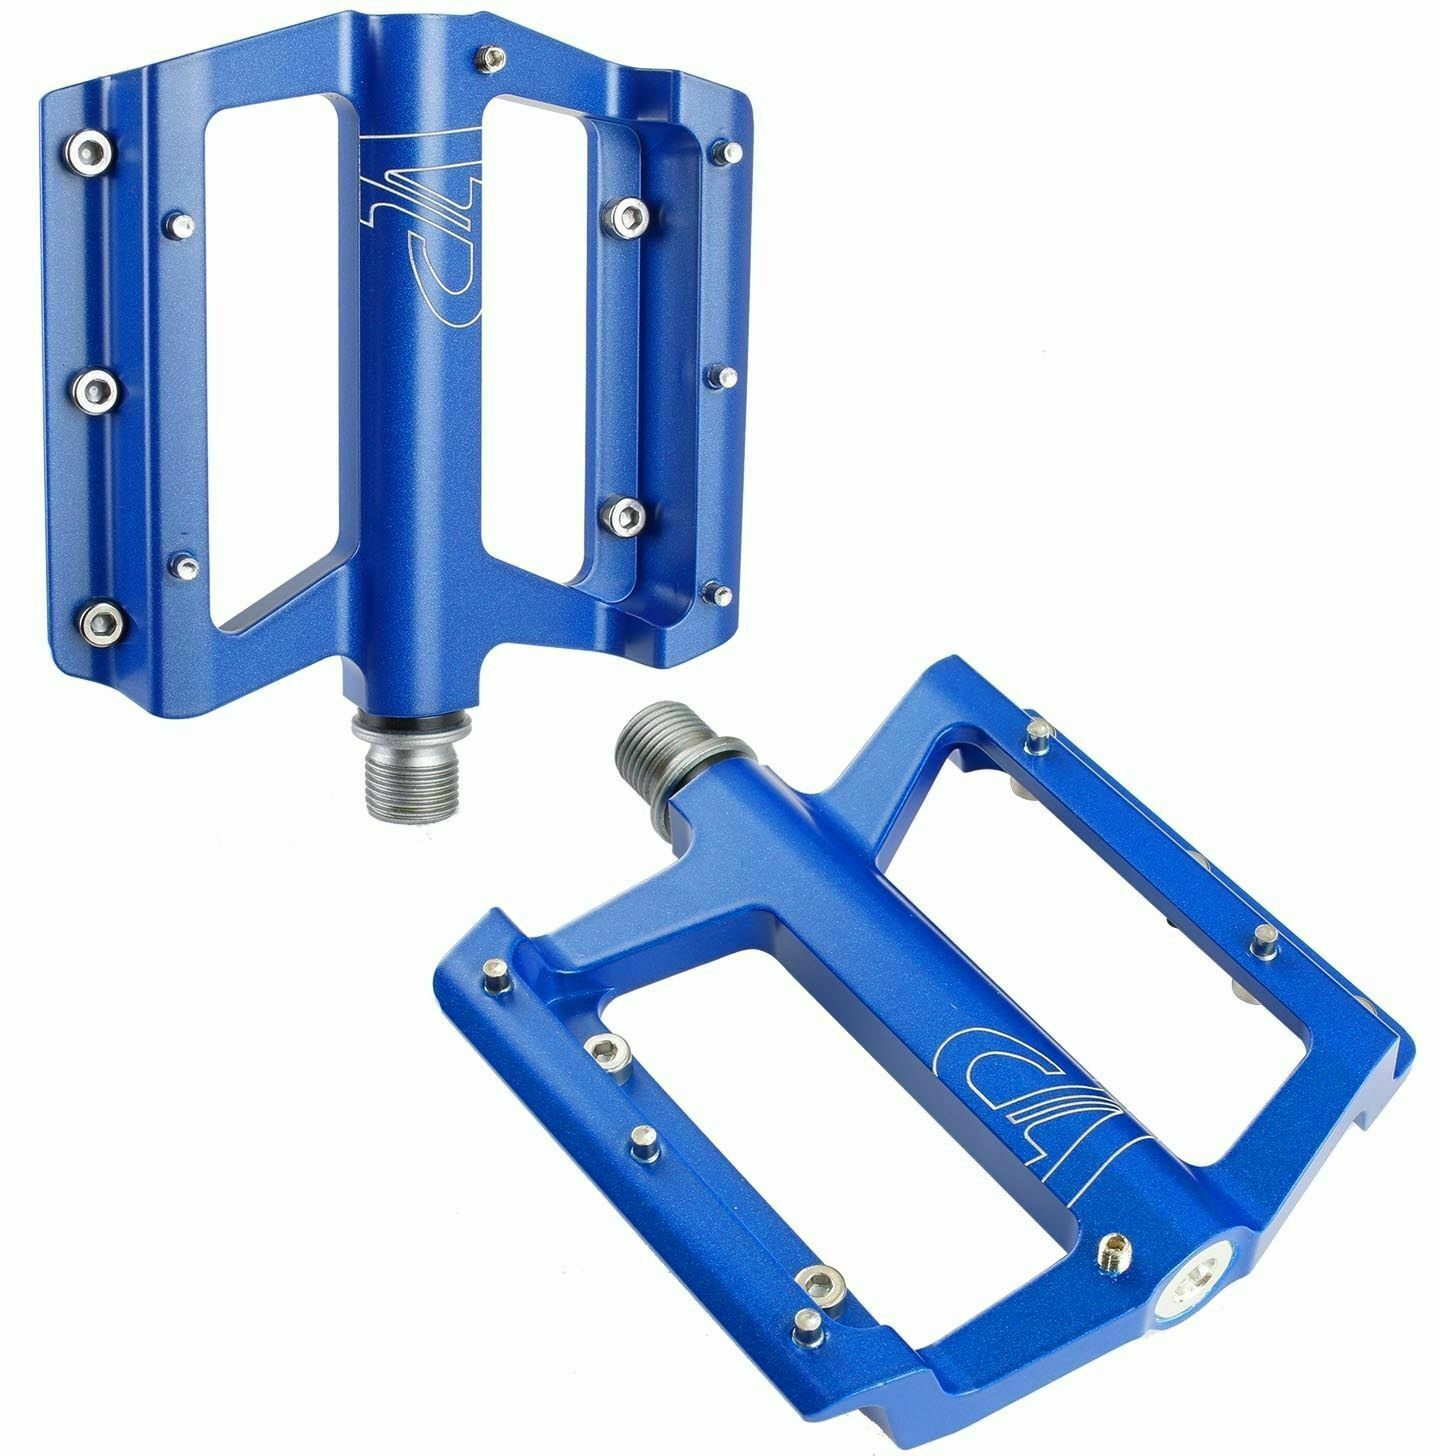 Buy VP Components VP-69 Mountain Bike Bicycle Pedals Blue | CD